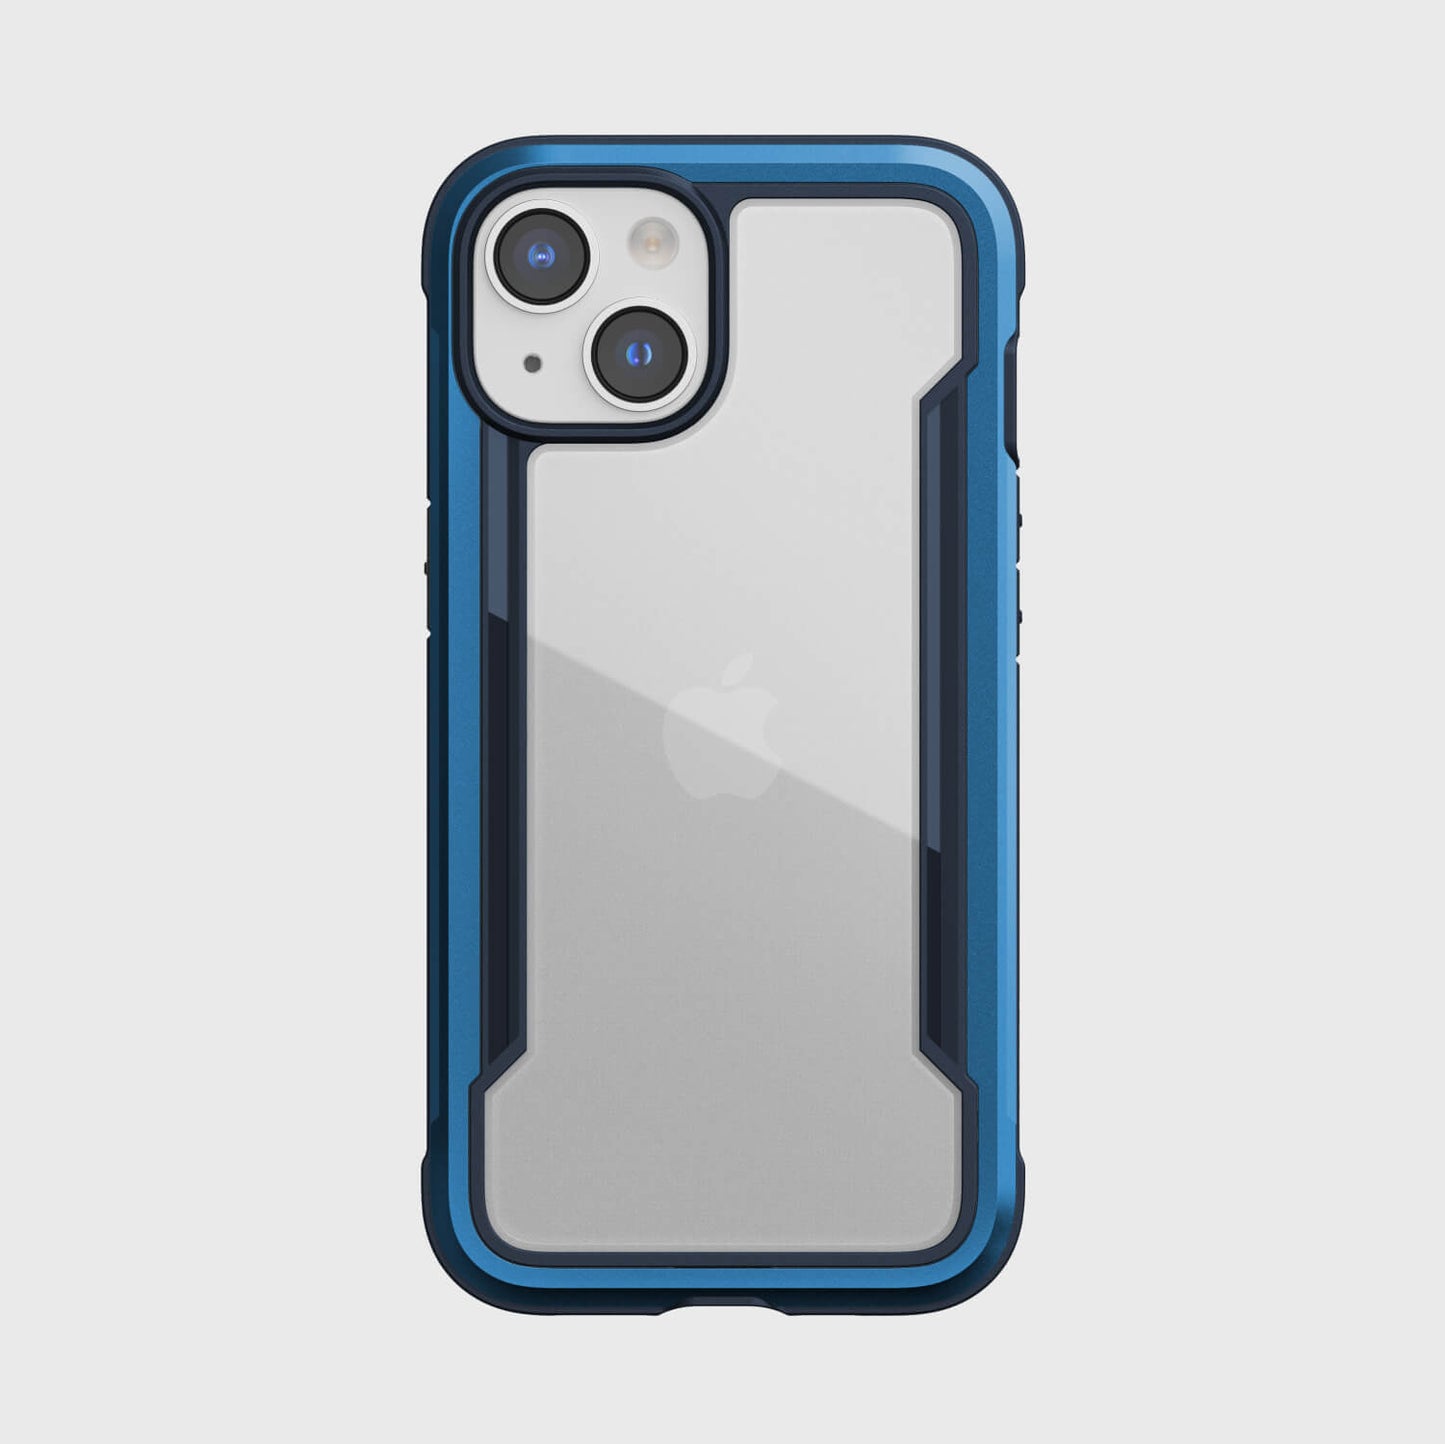 The iPhone 14 Case - Shield by Raptic, with screen protection, is shown in blue.